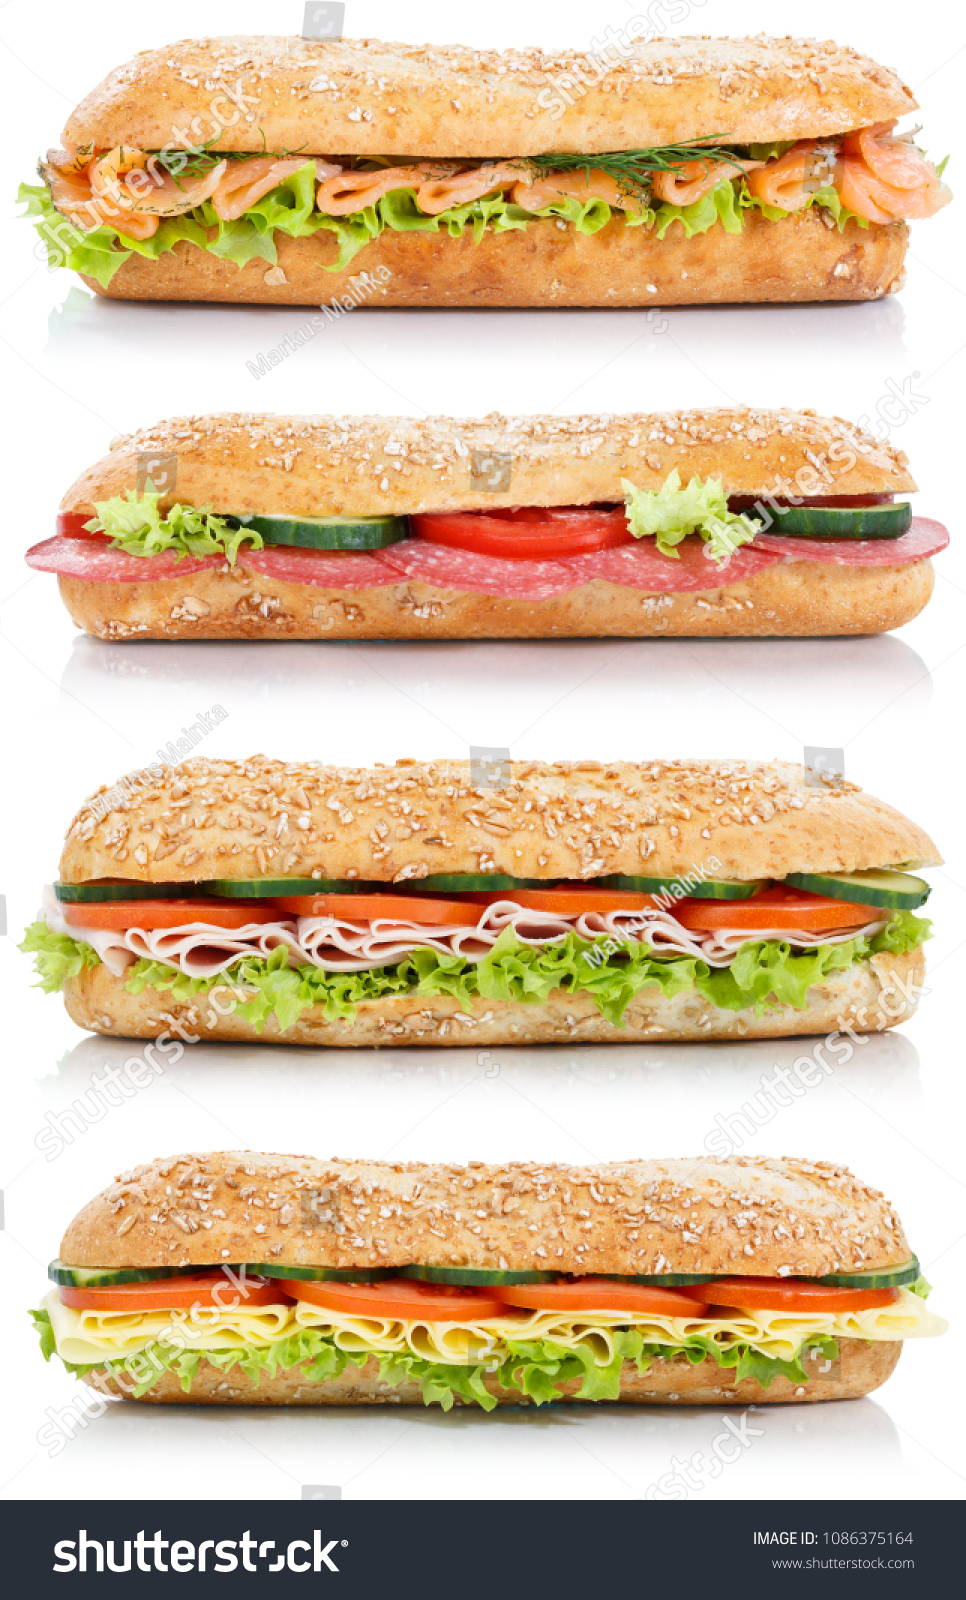 Collection of sub sandwiches with salami ham cheese salmon fish lateral portrait format isolated on a white background #1086375164